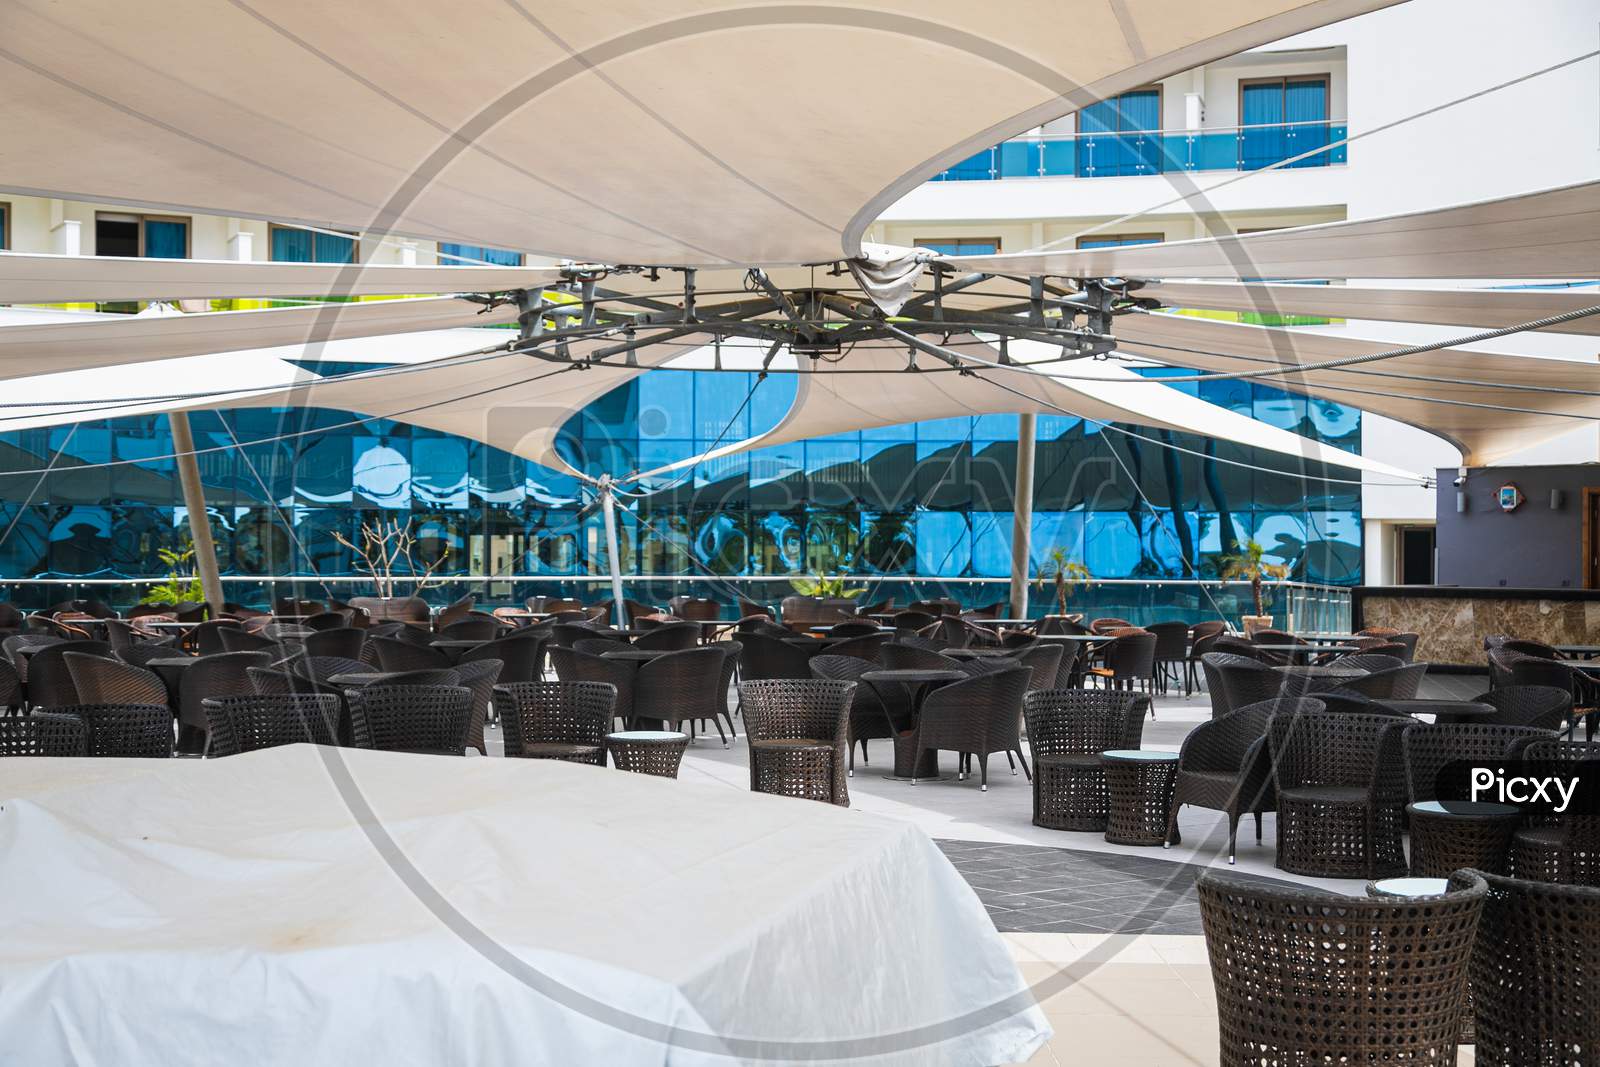 Huge Dining Area With Dark Tables And Chairs Outside Under Huge Umbrellas In The Hotel